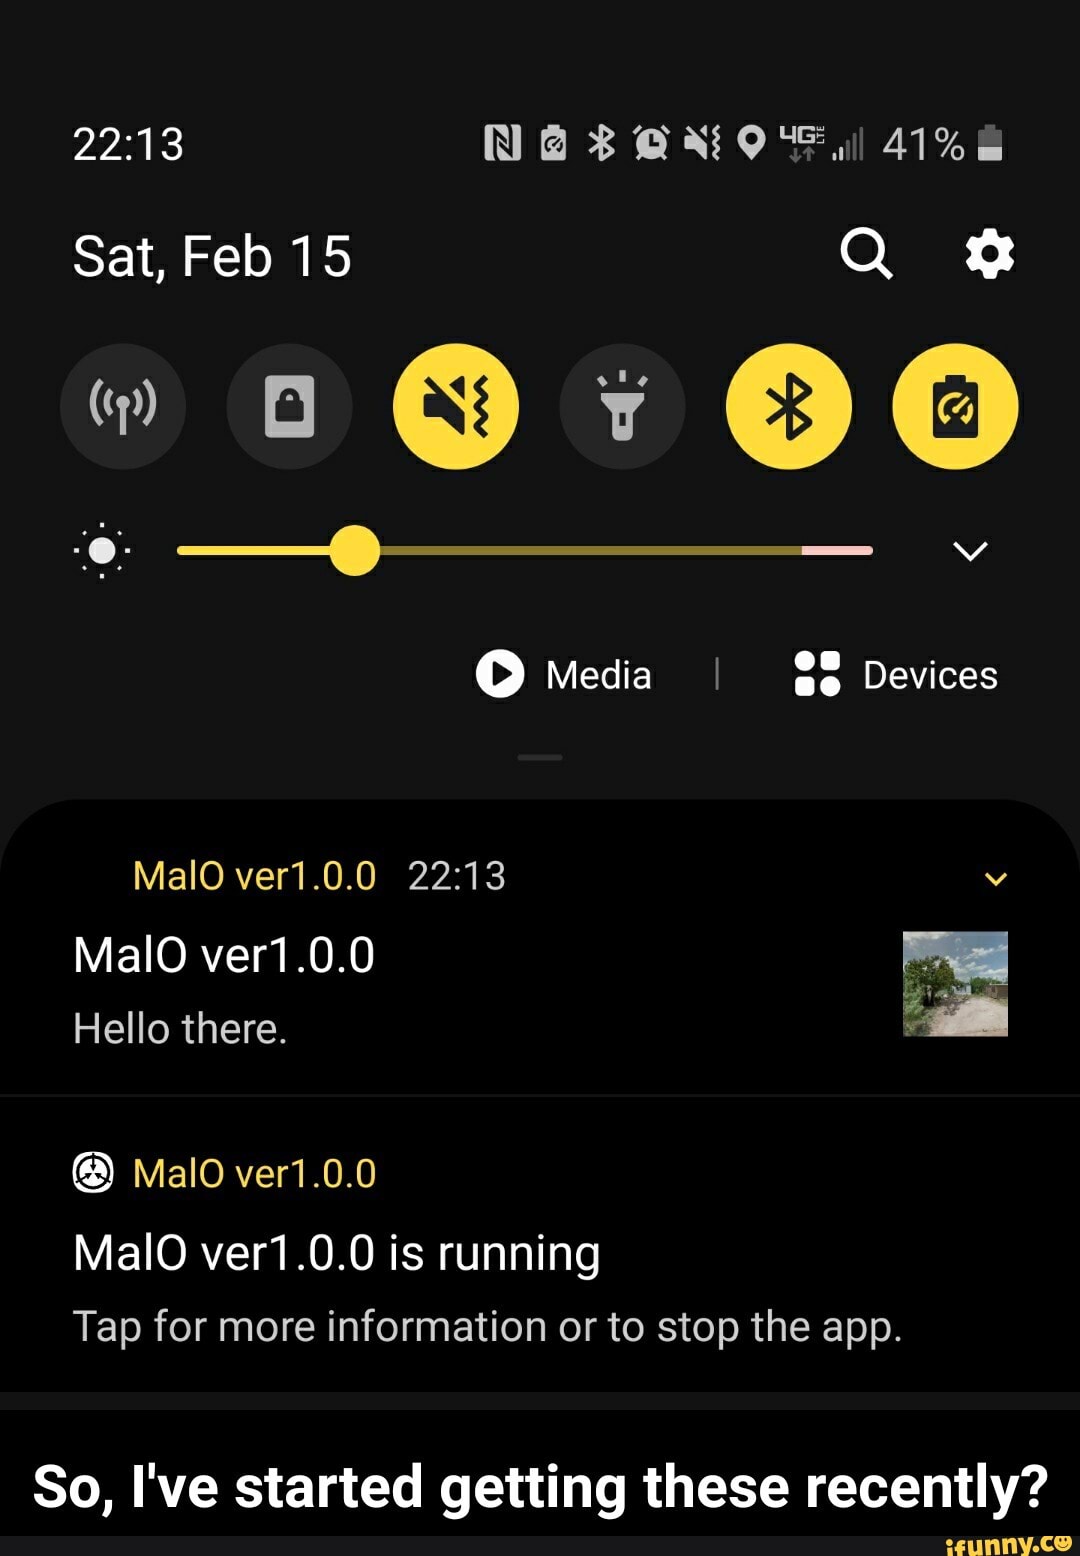 It's been a few days since I installed the MalO app 